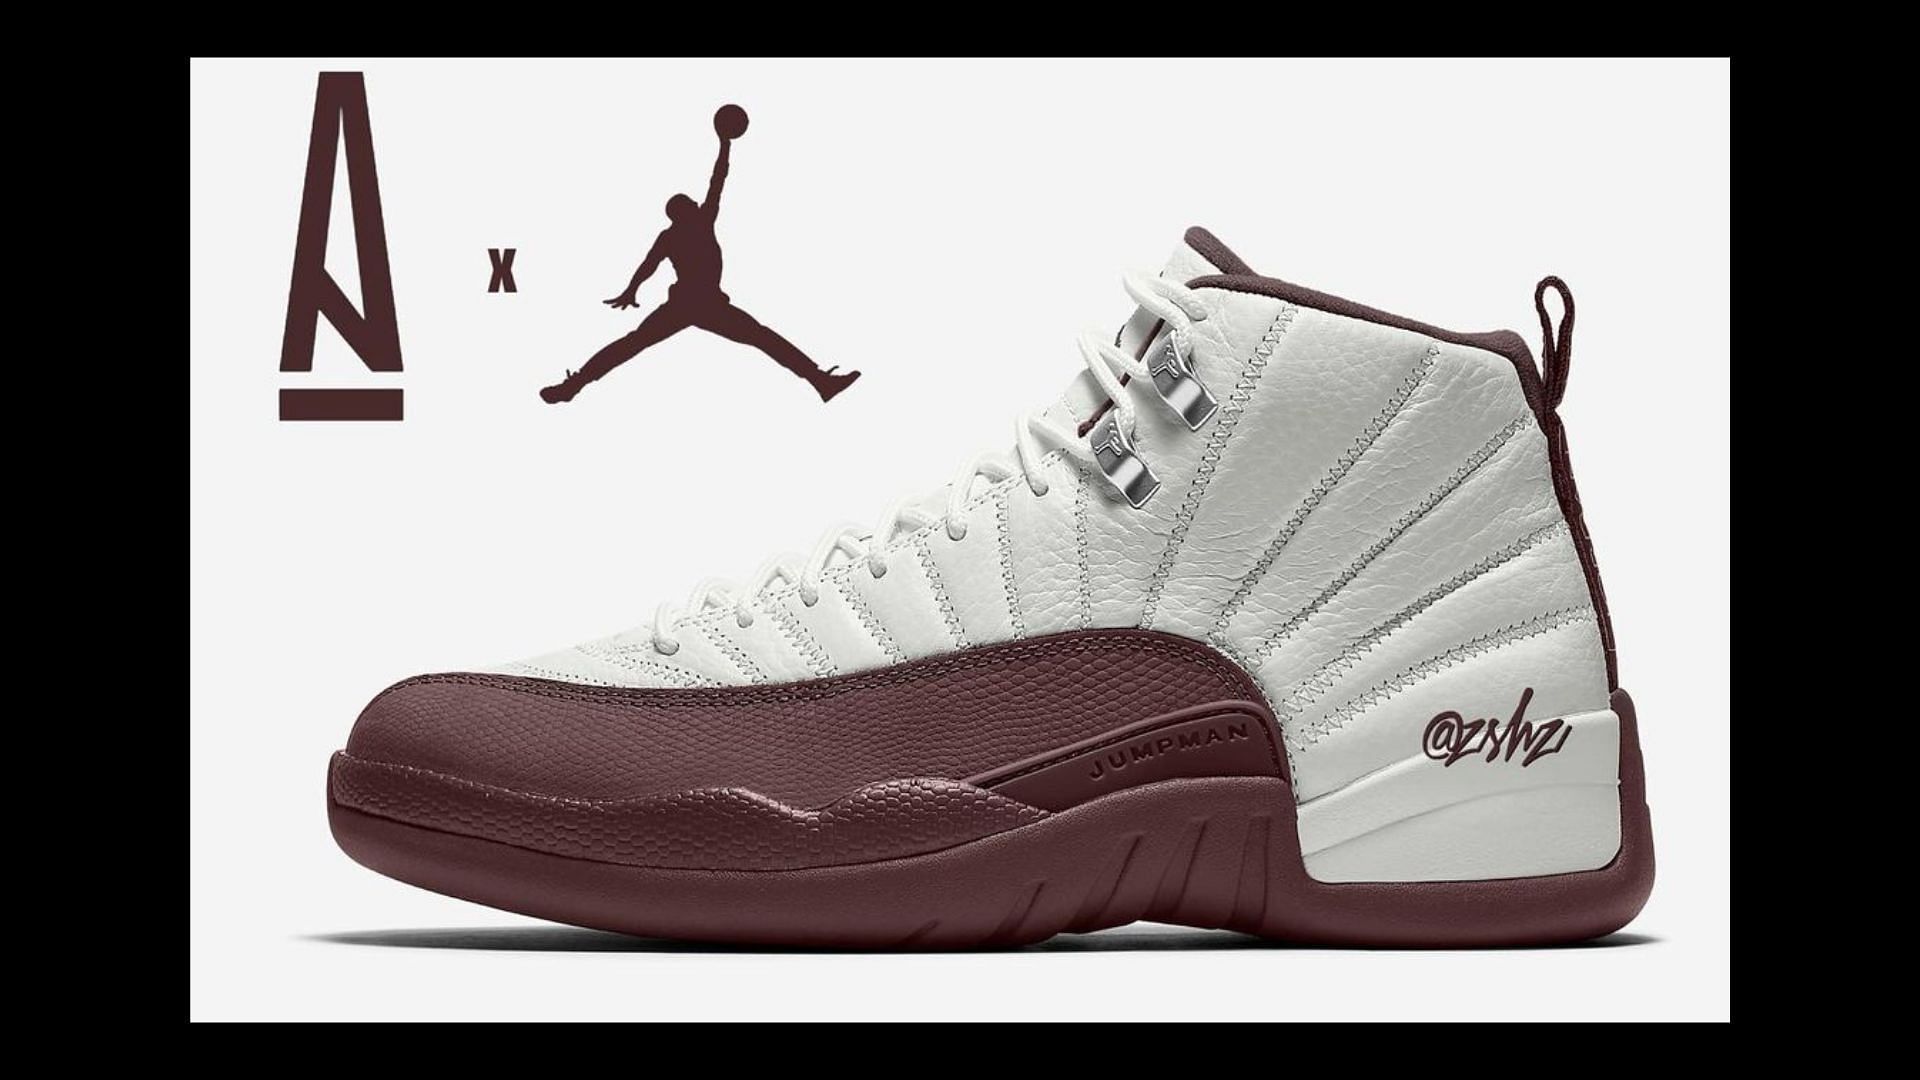 Mock-up Imagery of the white / Burgundy Crush colorway (Image via @zsneakerheads / Instagram)